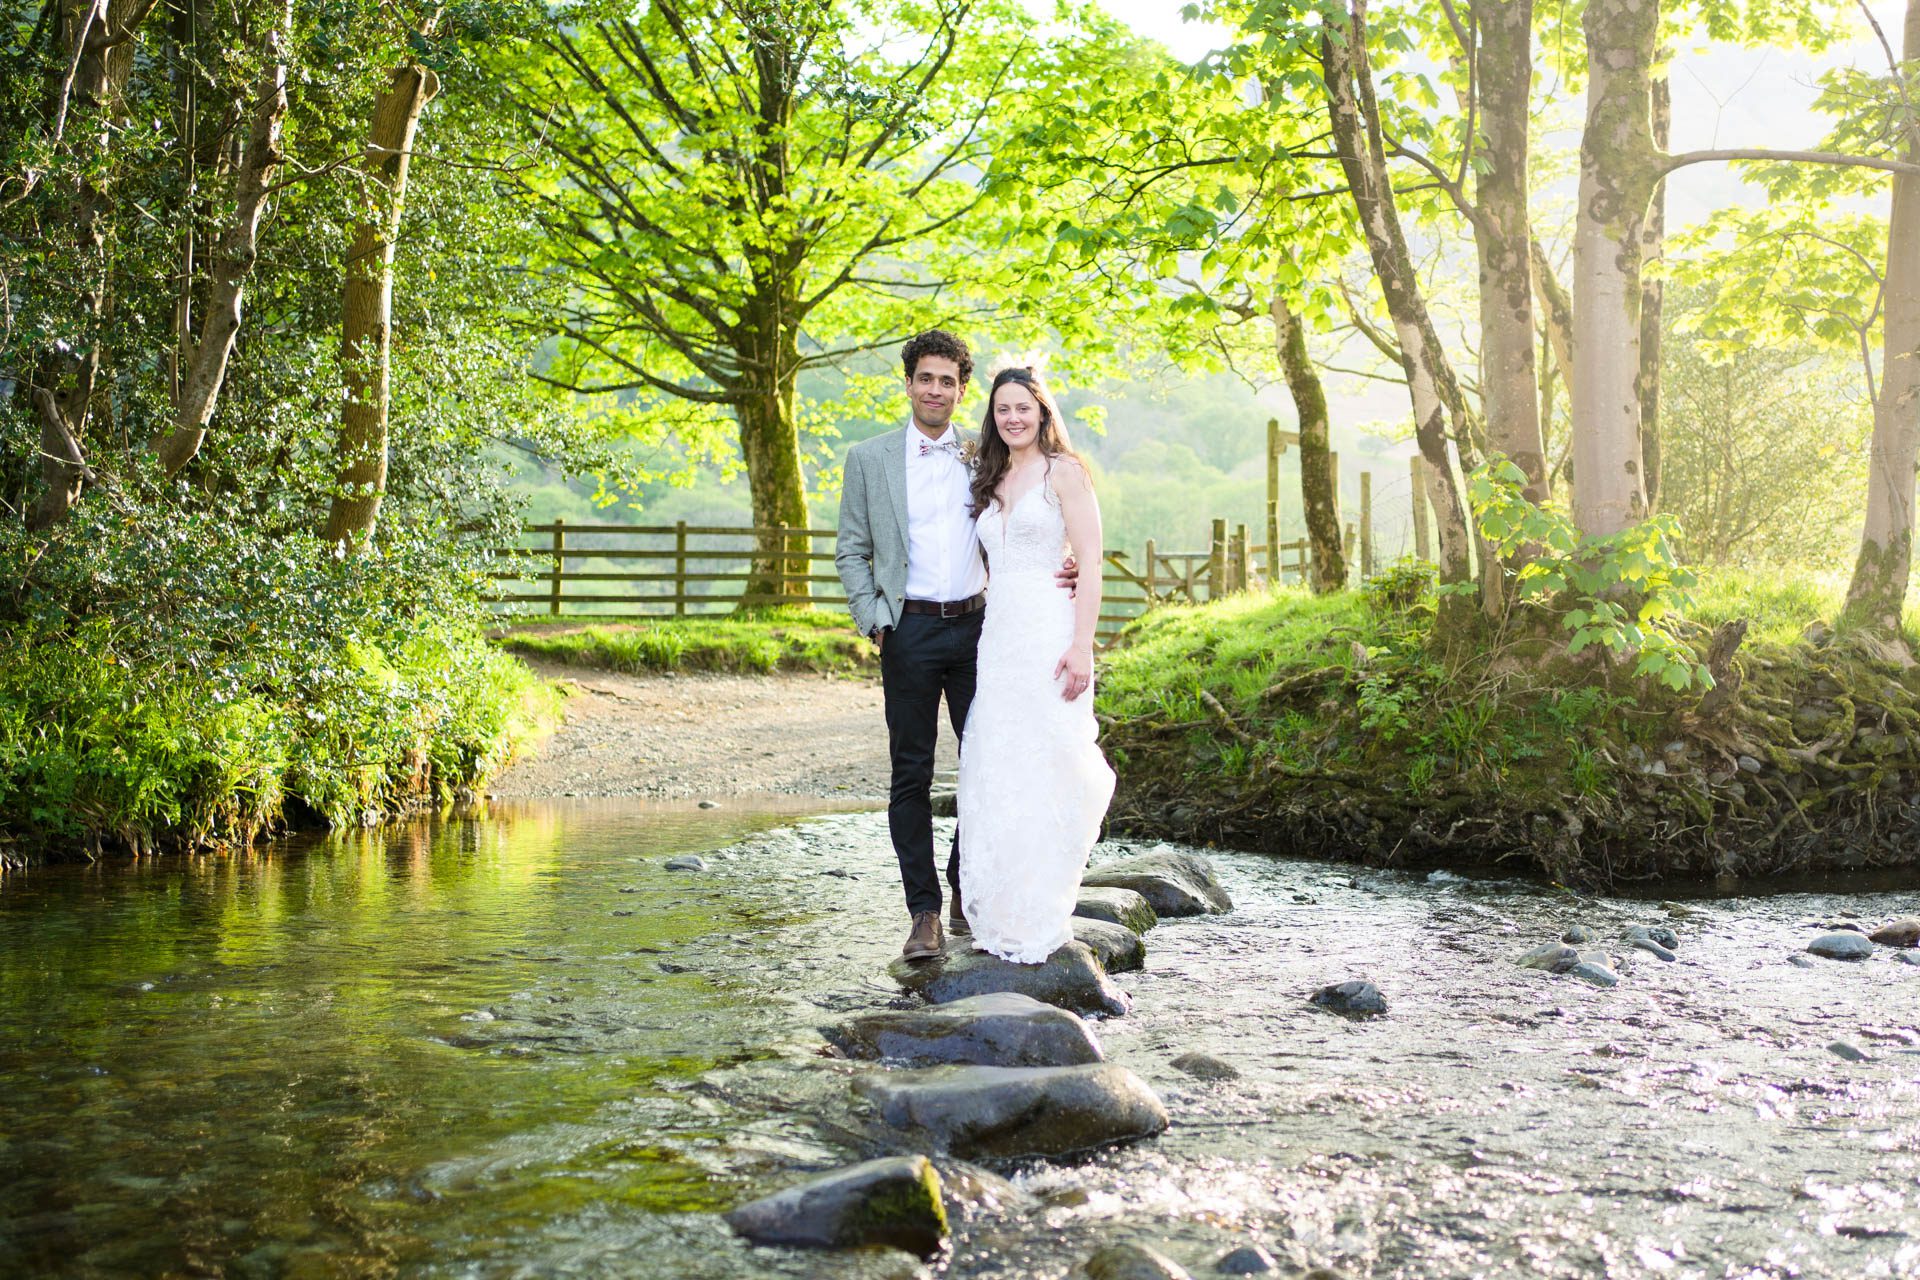 A Borrowdale Wedding Portrait. Bride and groom standing on stepping stones